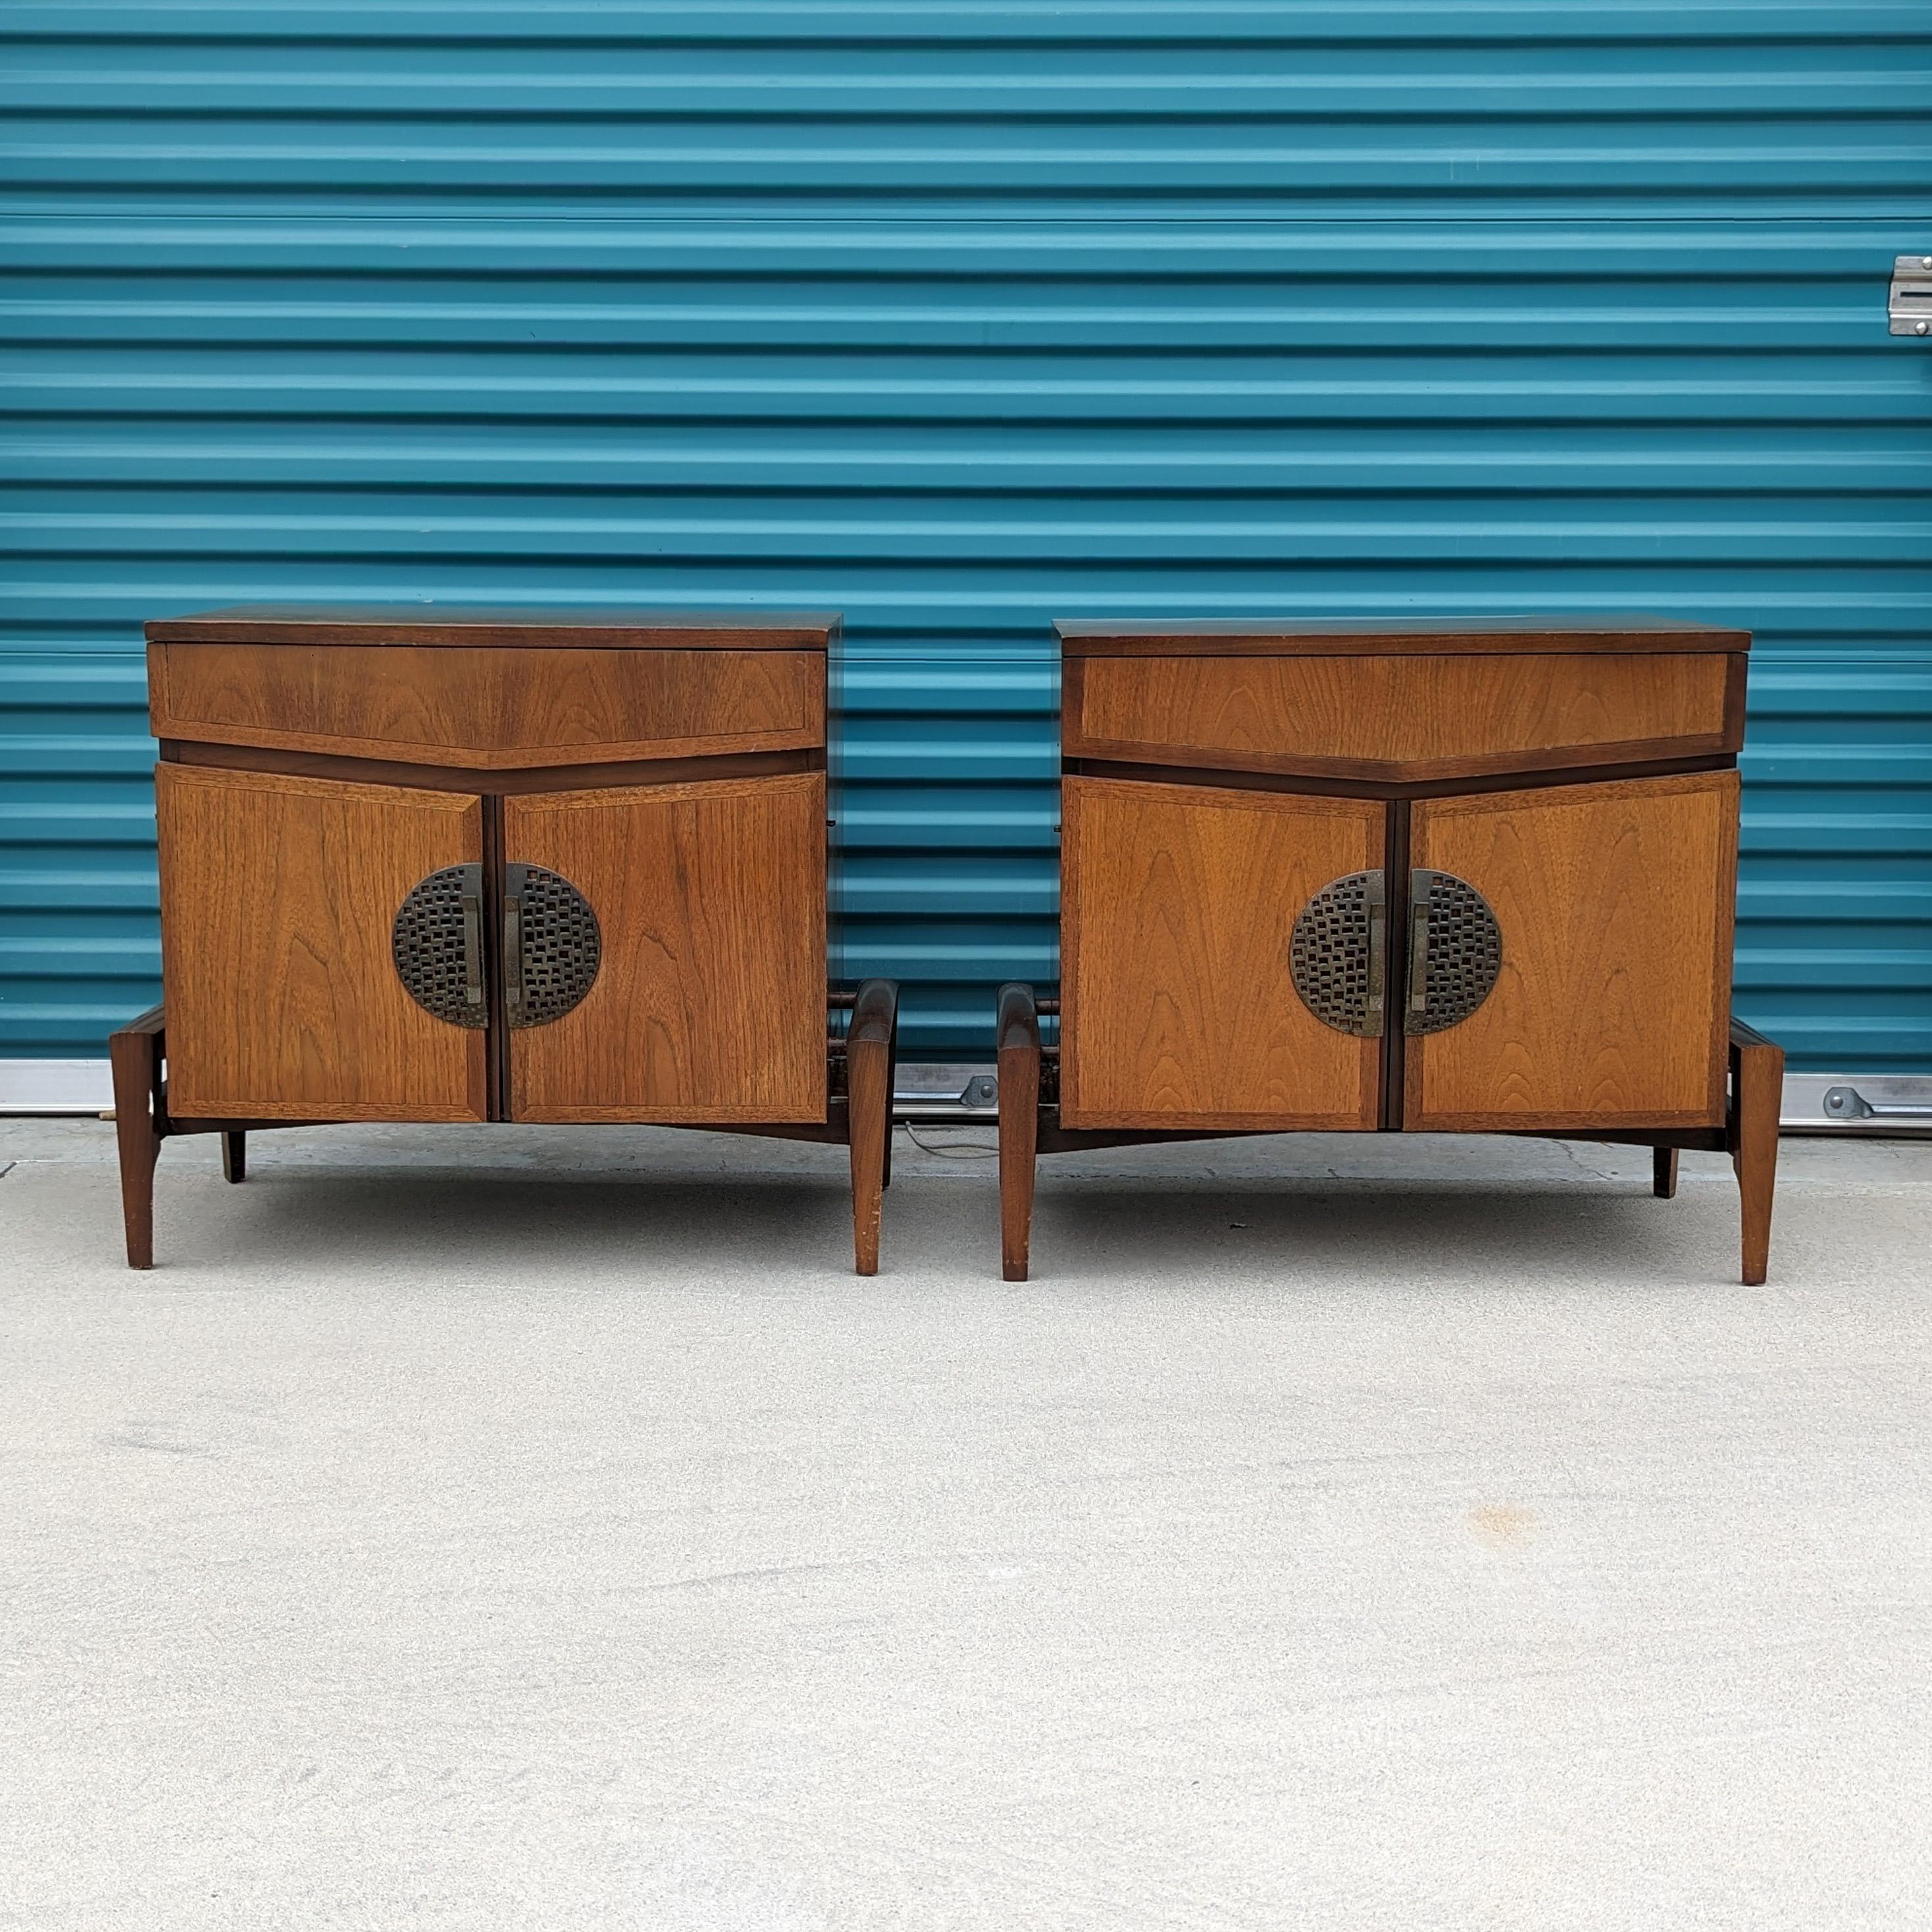 Just in, a walnut and bronze nightstands by Helen Hobey for Baker, c1960s. This pair is in original condition and features a walnut finish with a skeletal base making them seem like they're suspended in air. Two doors on each that open up to expose